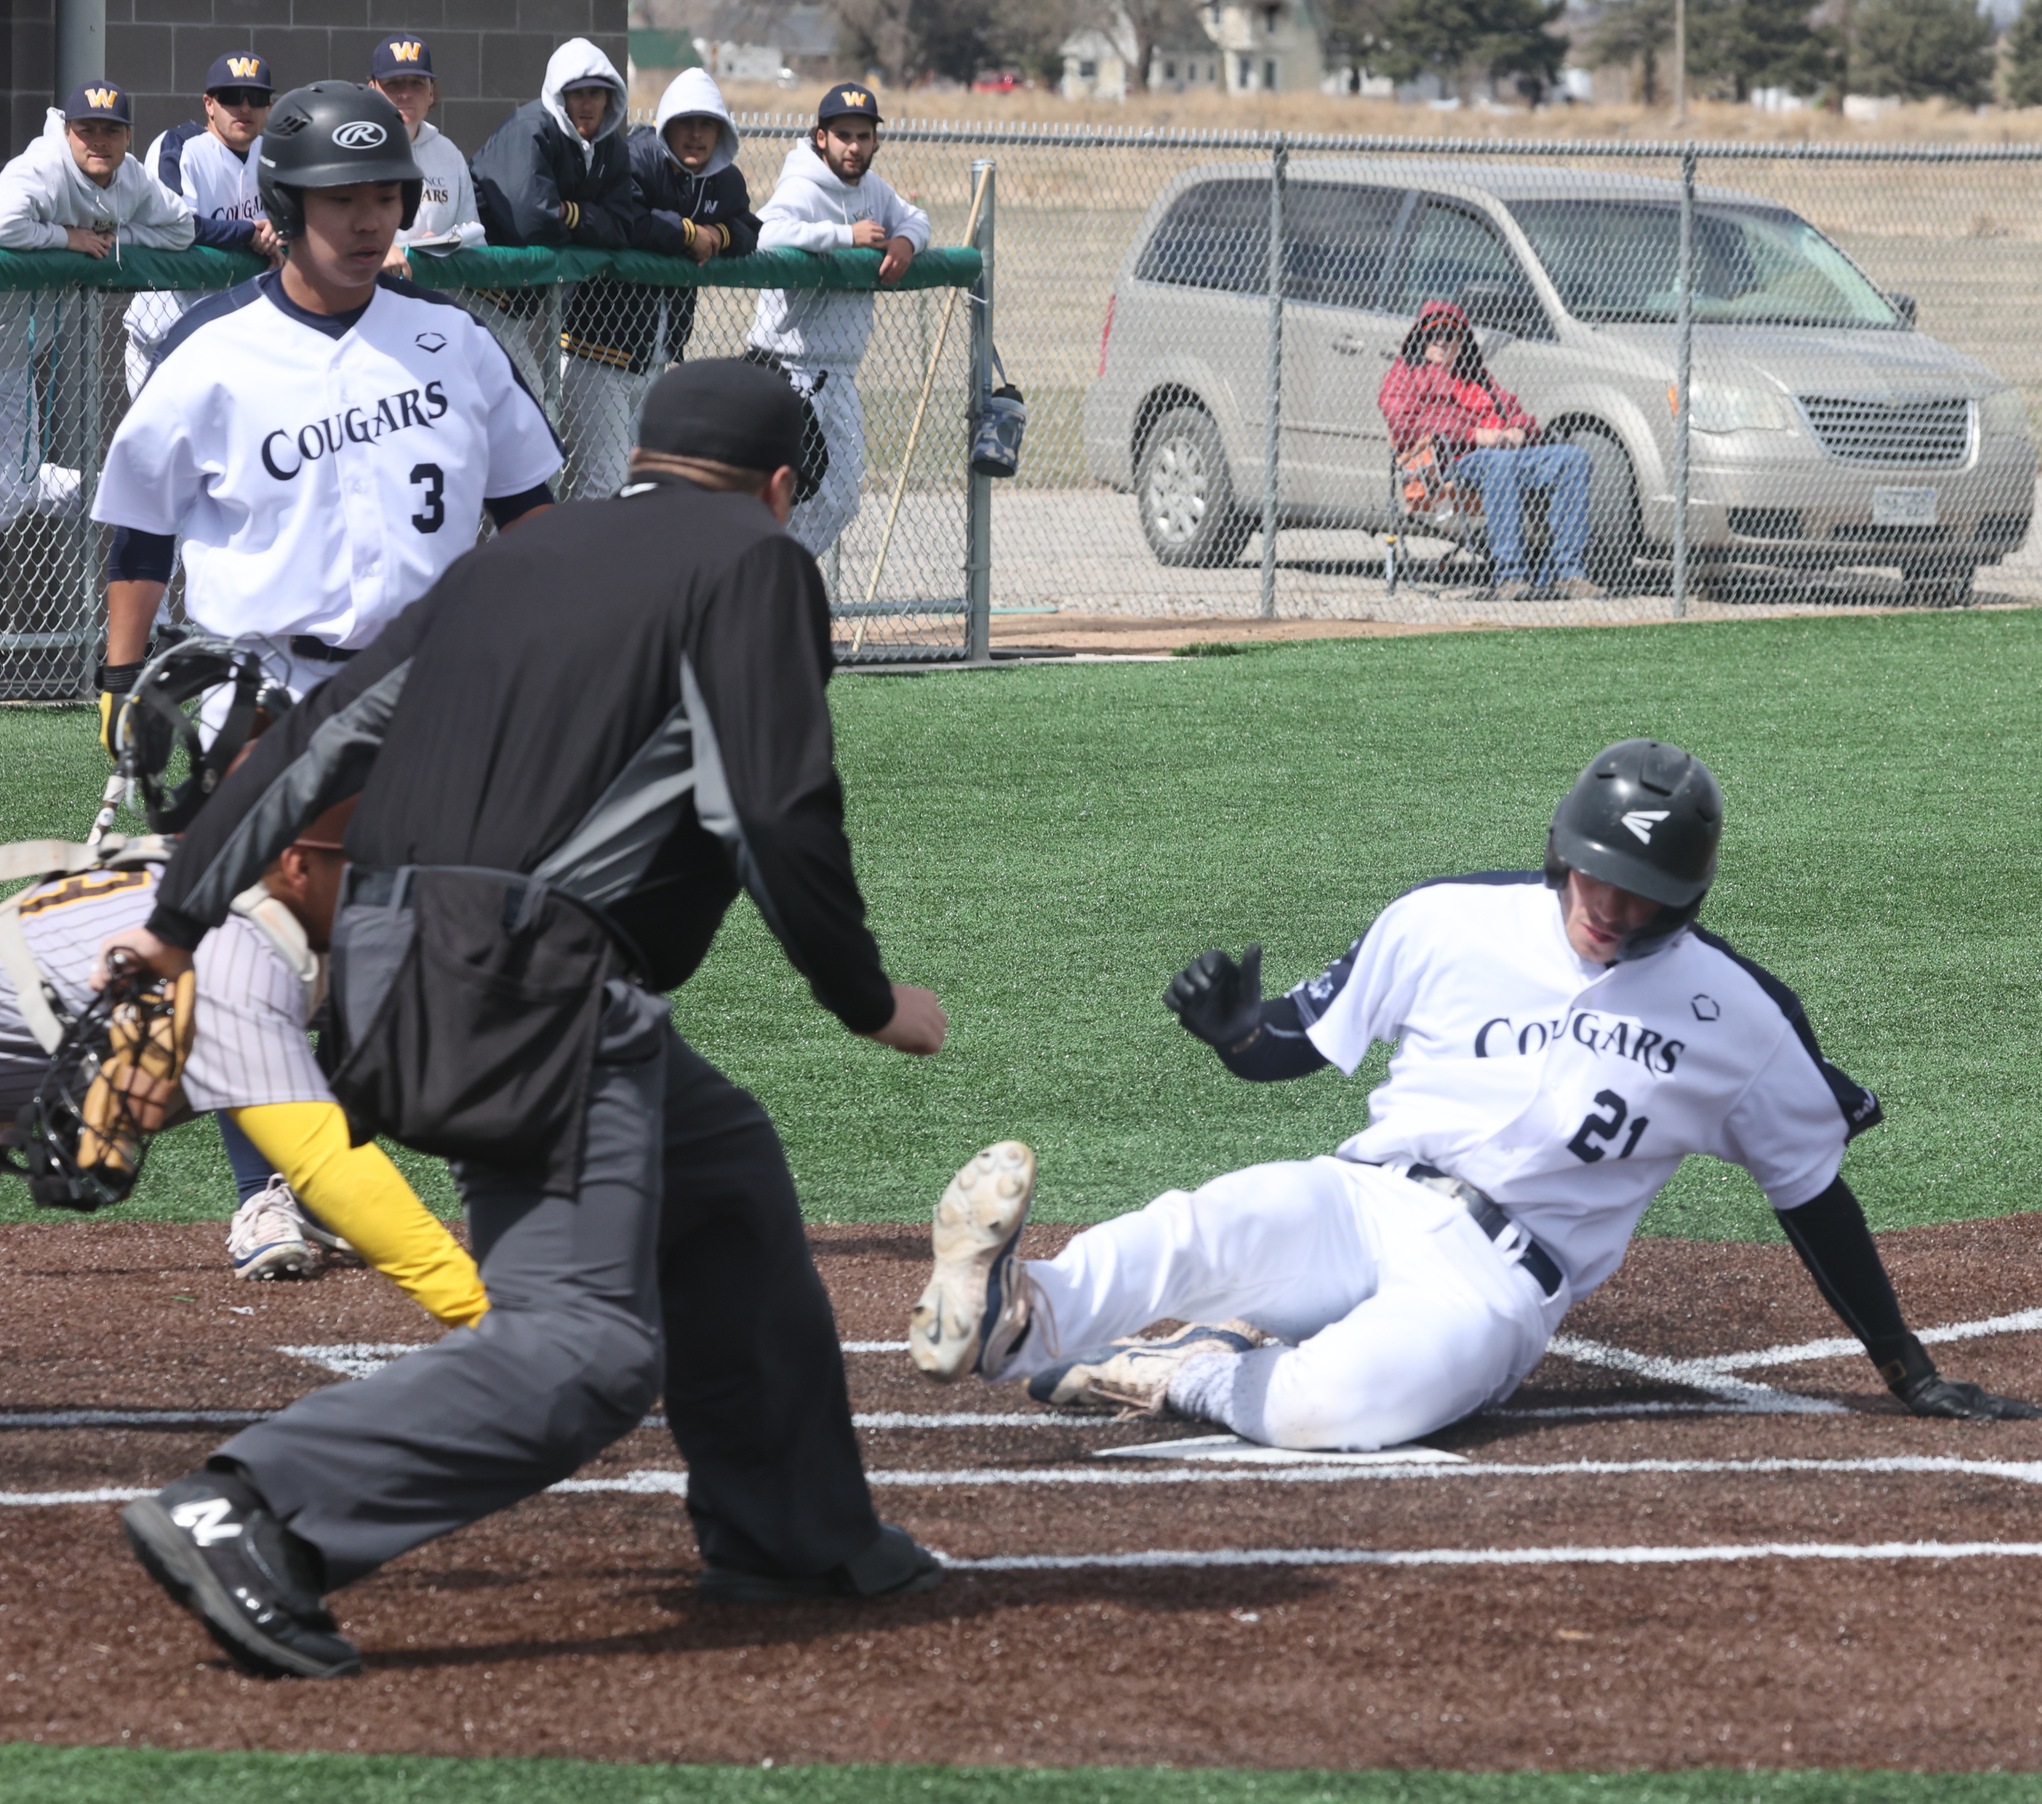 Caleb Caciari slides into home plate for the first run of the game on Tuesday against Garden City.